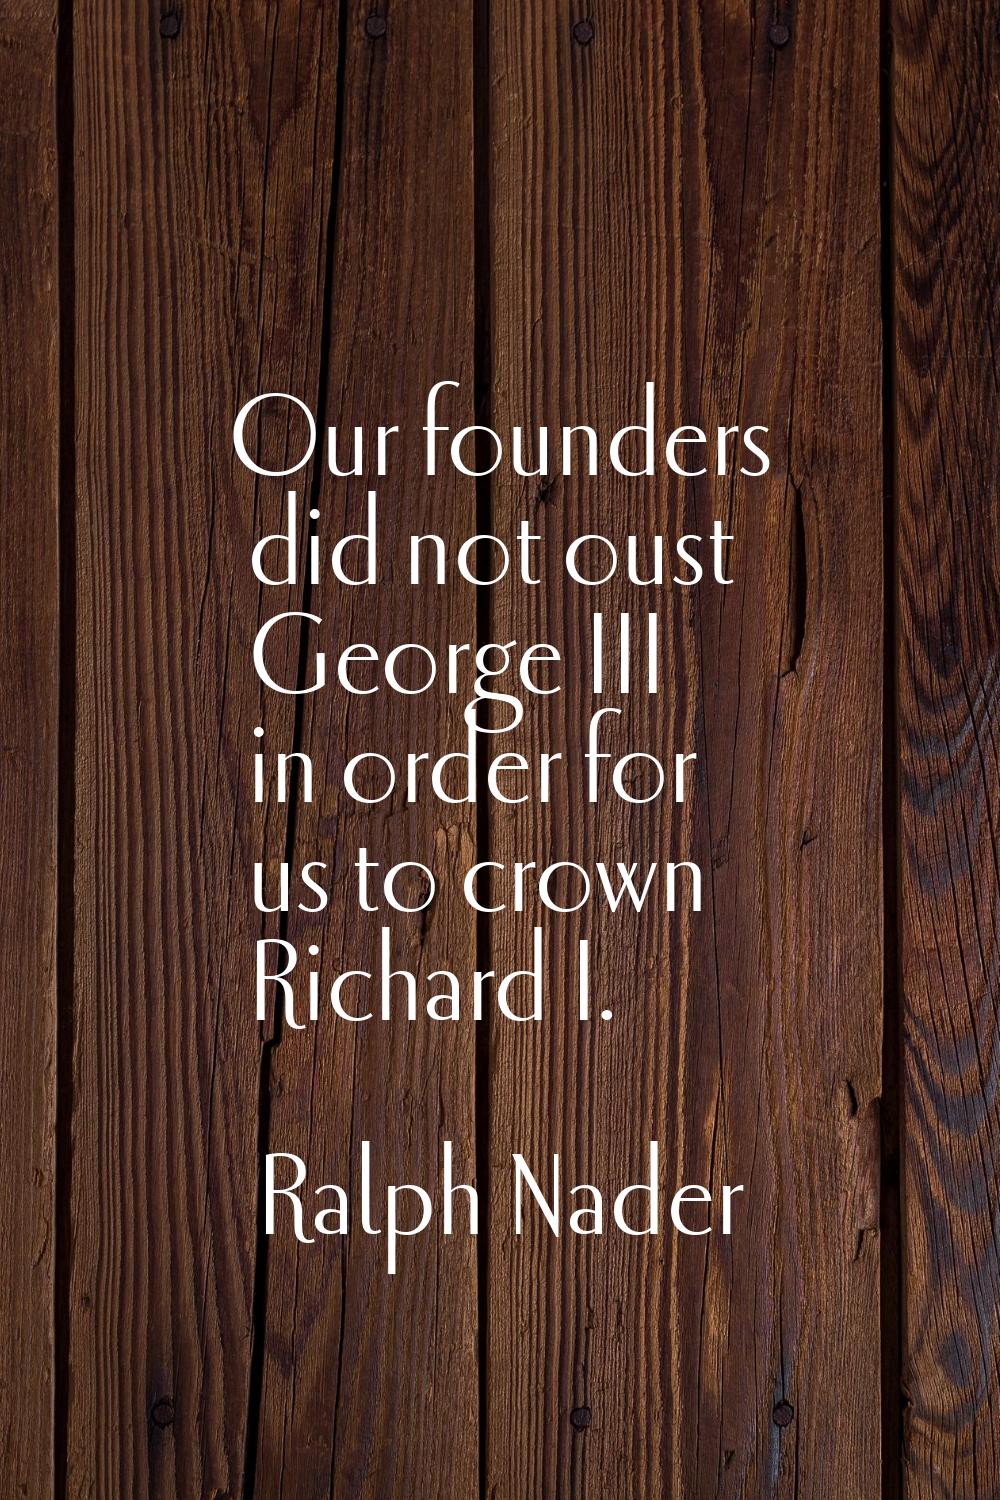 Our founders did not oust George III in order for us to crown Richard I.